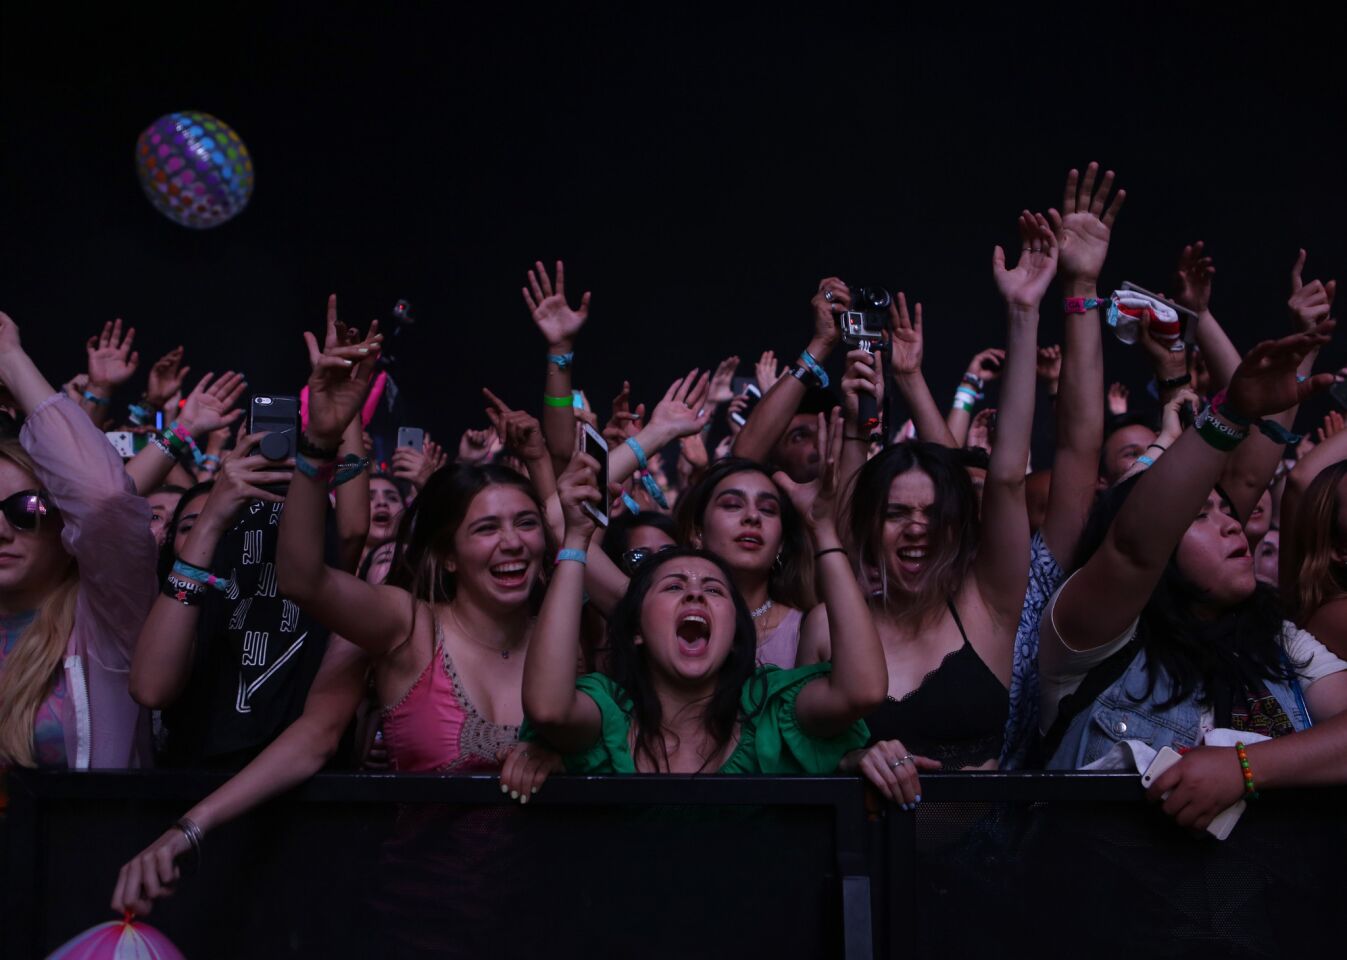 Fans cheer and dance as Calvin Harris performs on the main stage on the final night of the Coachella Valley Music and Arts Festival's first weekend.